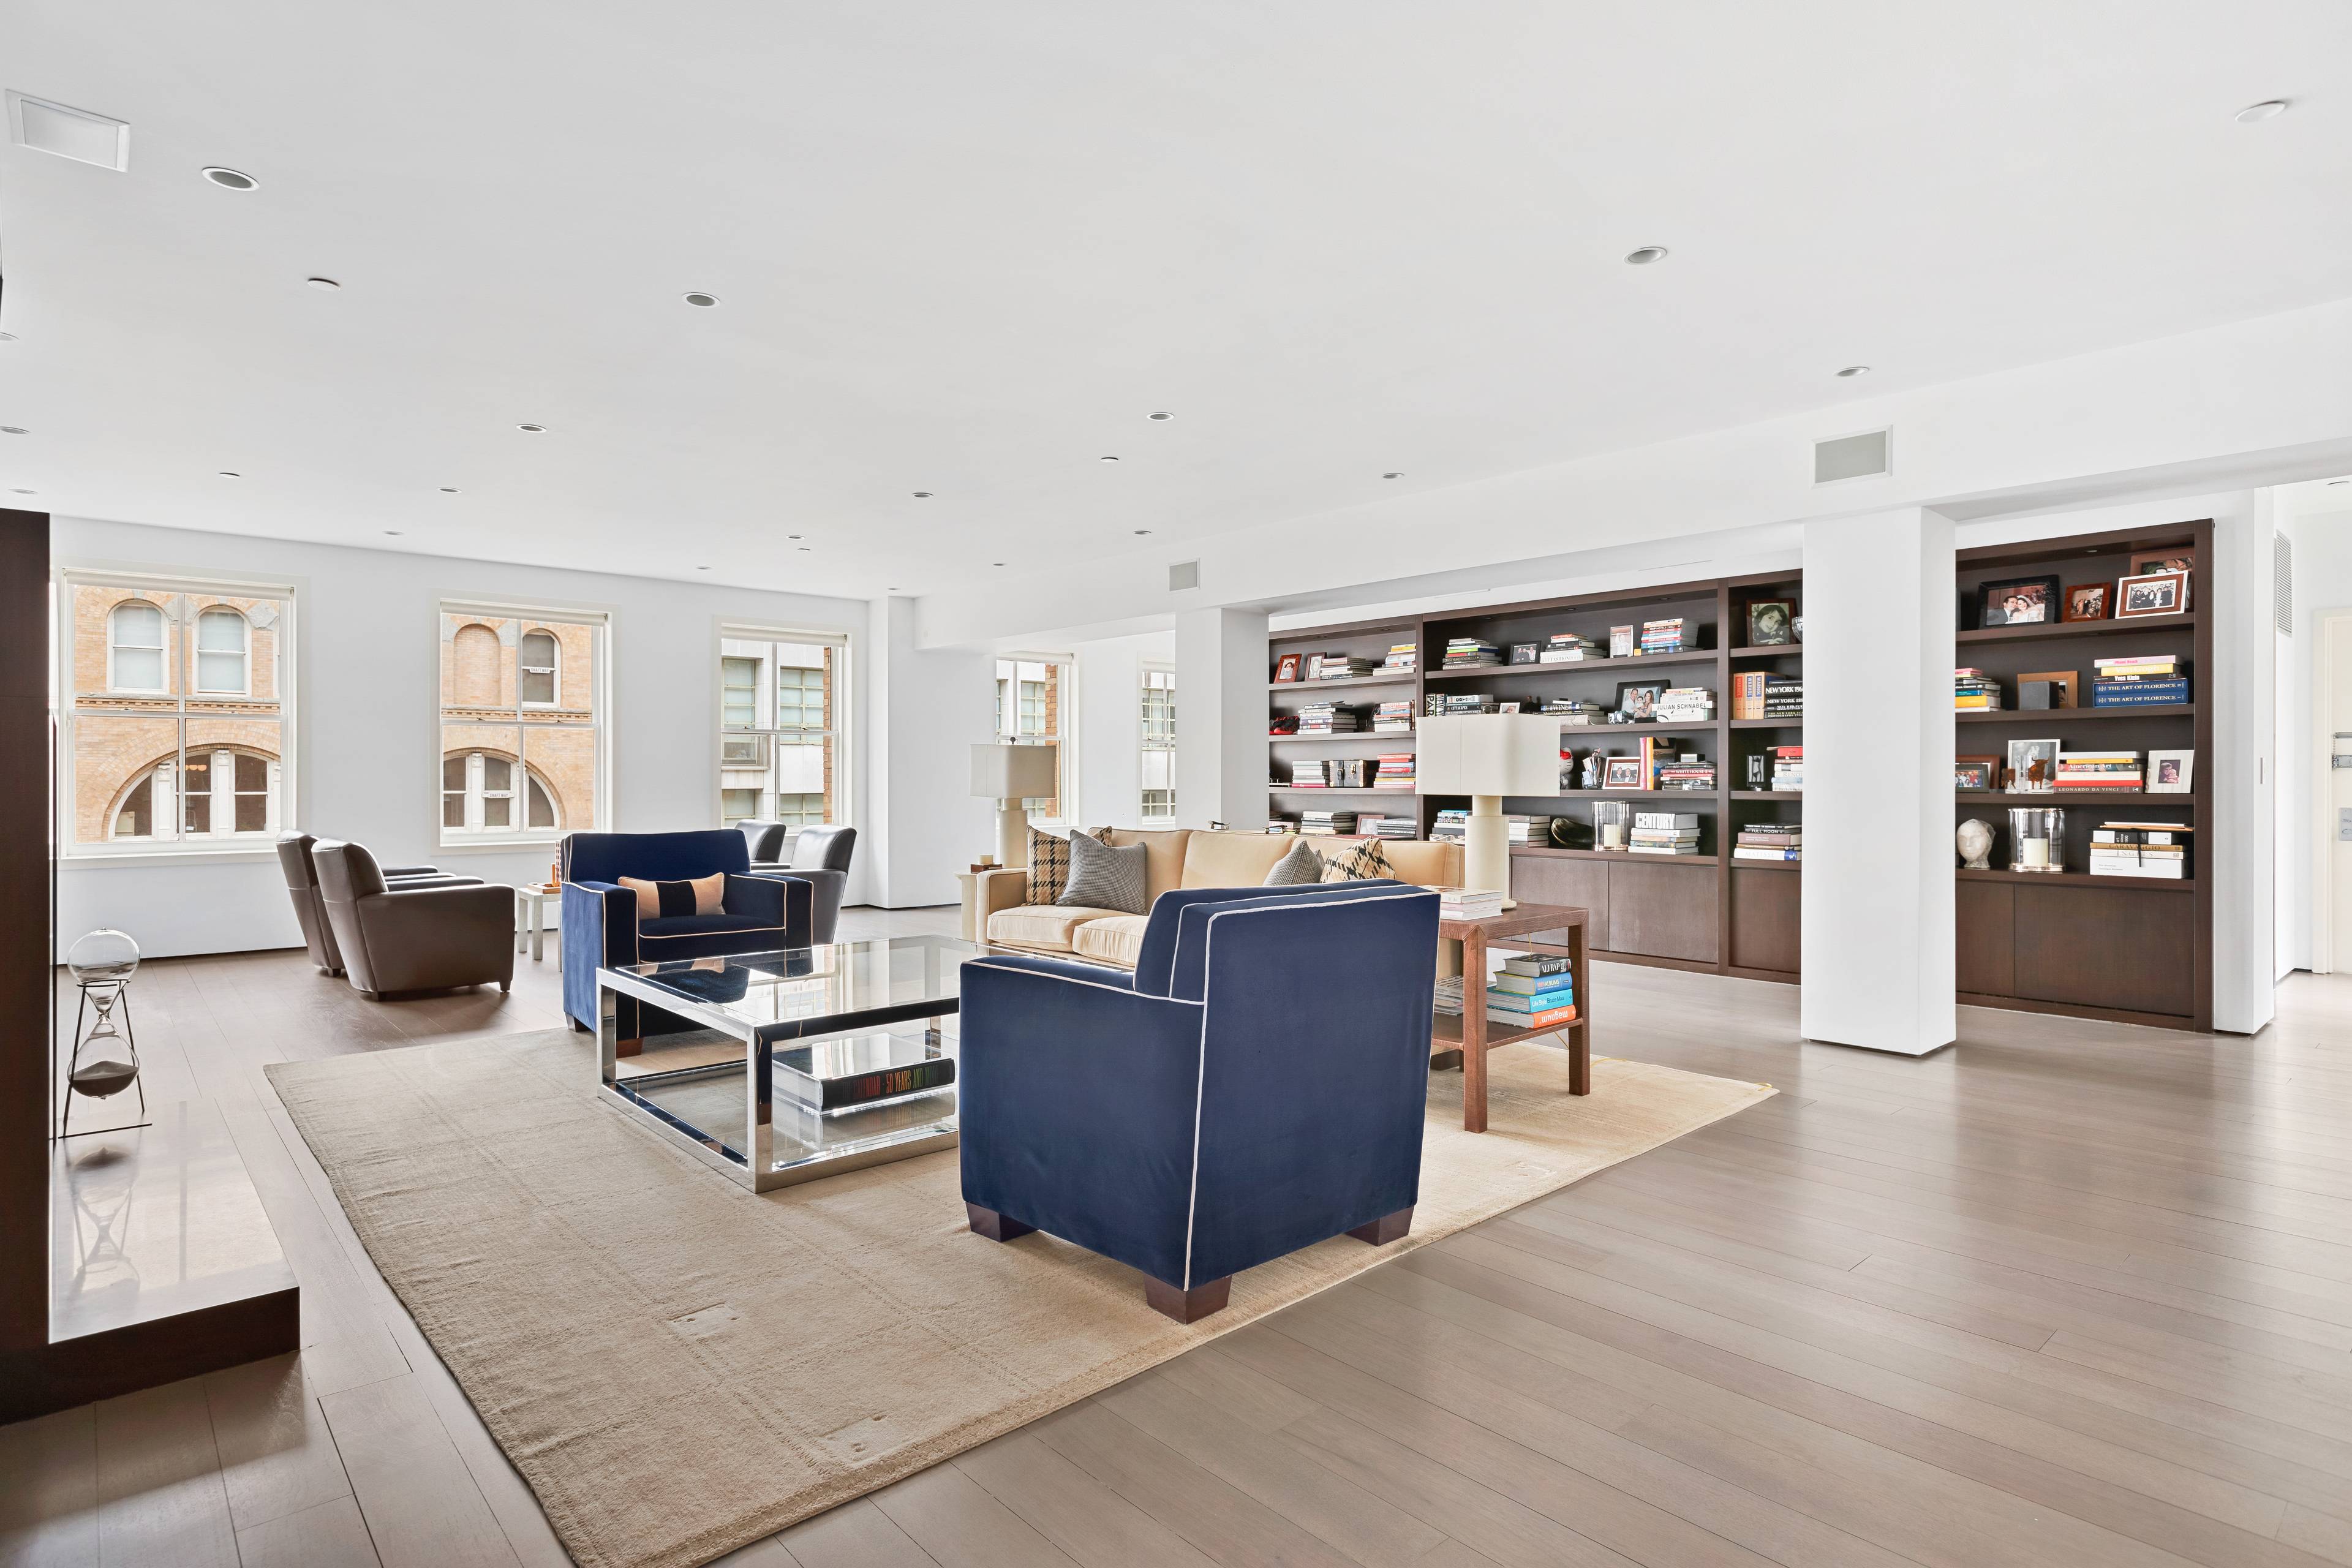 Loft living is unparalleled at the handsome Roebling Building in TriBeCa.